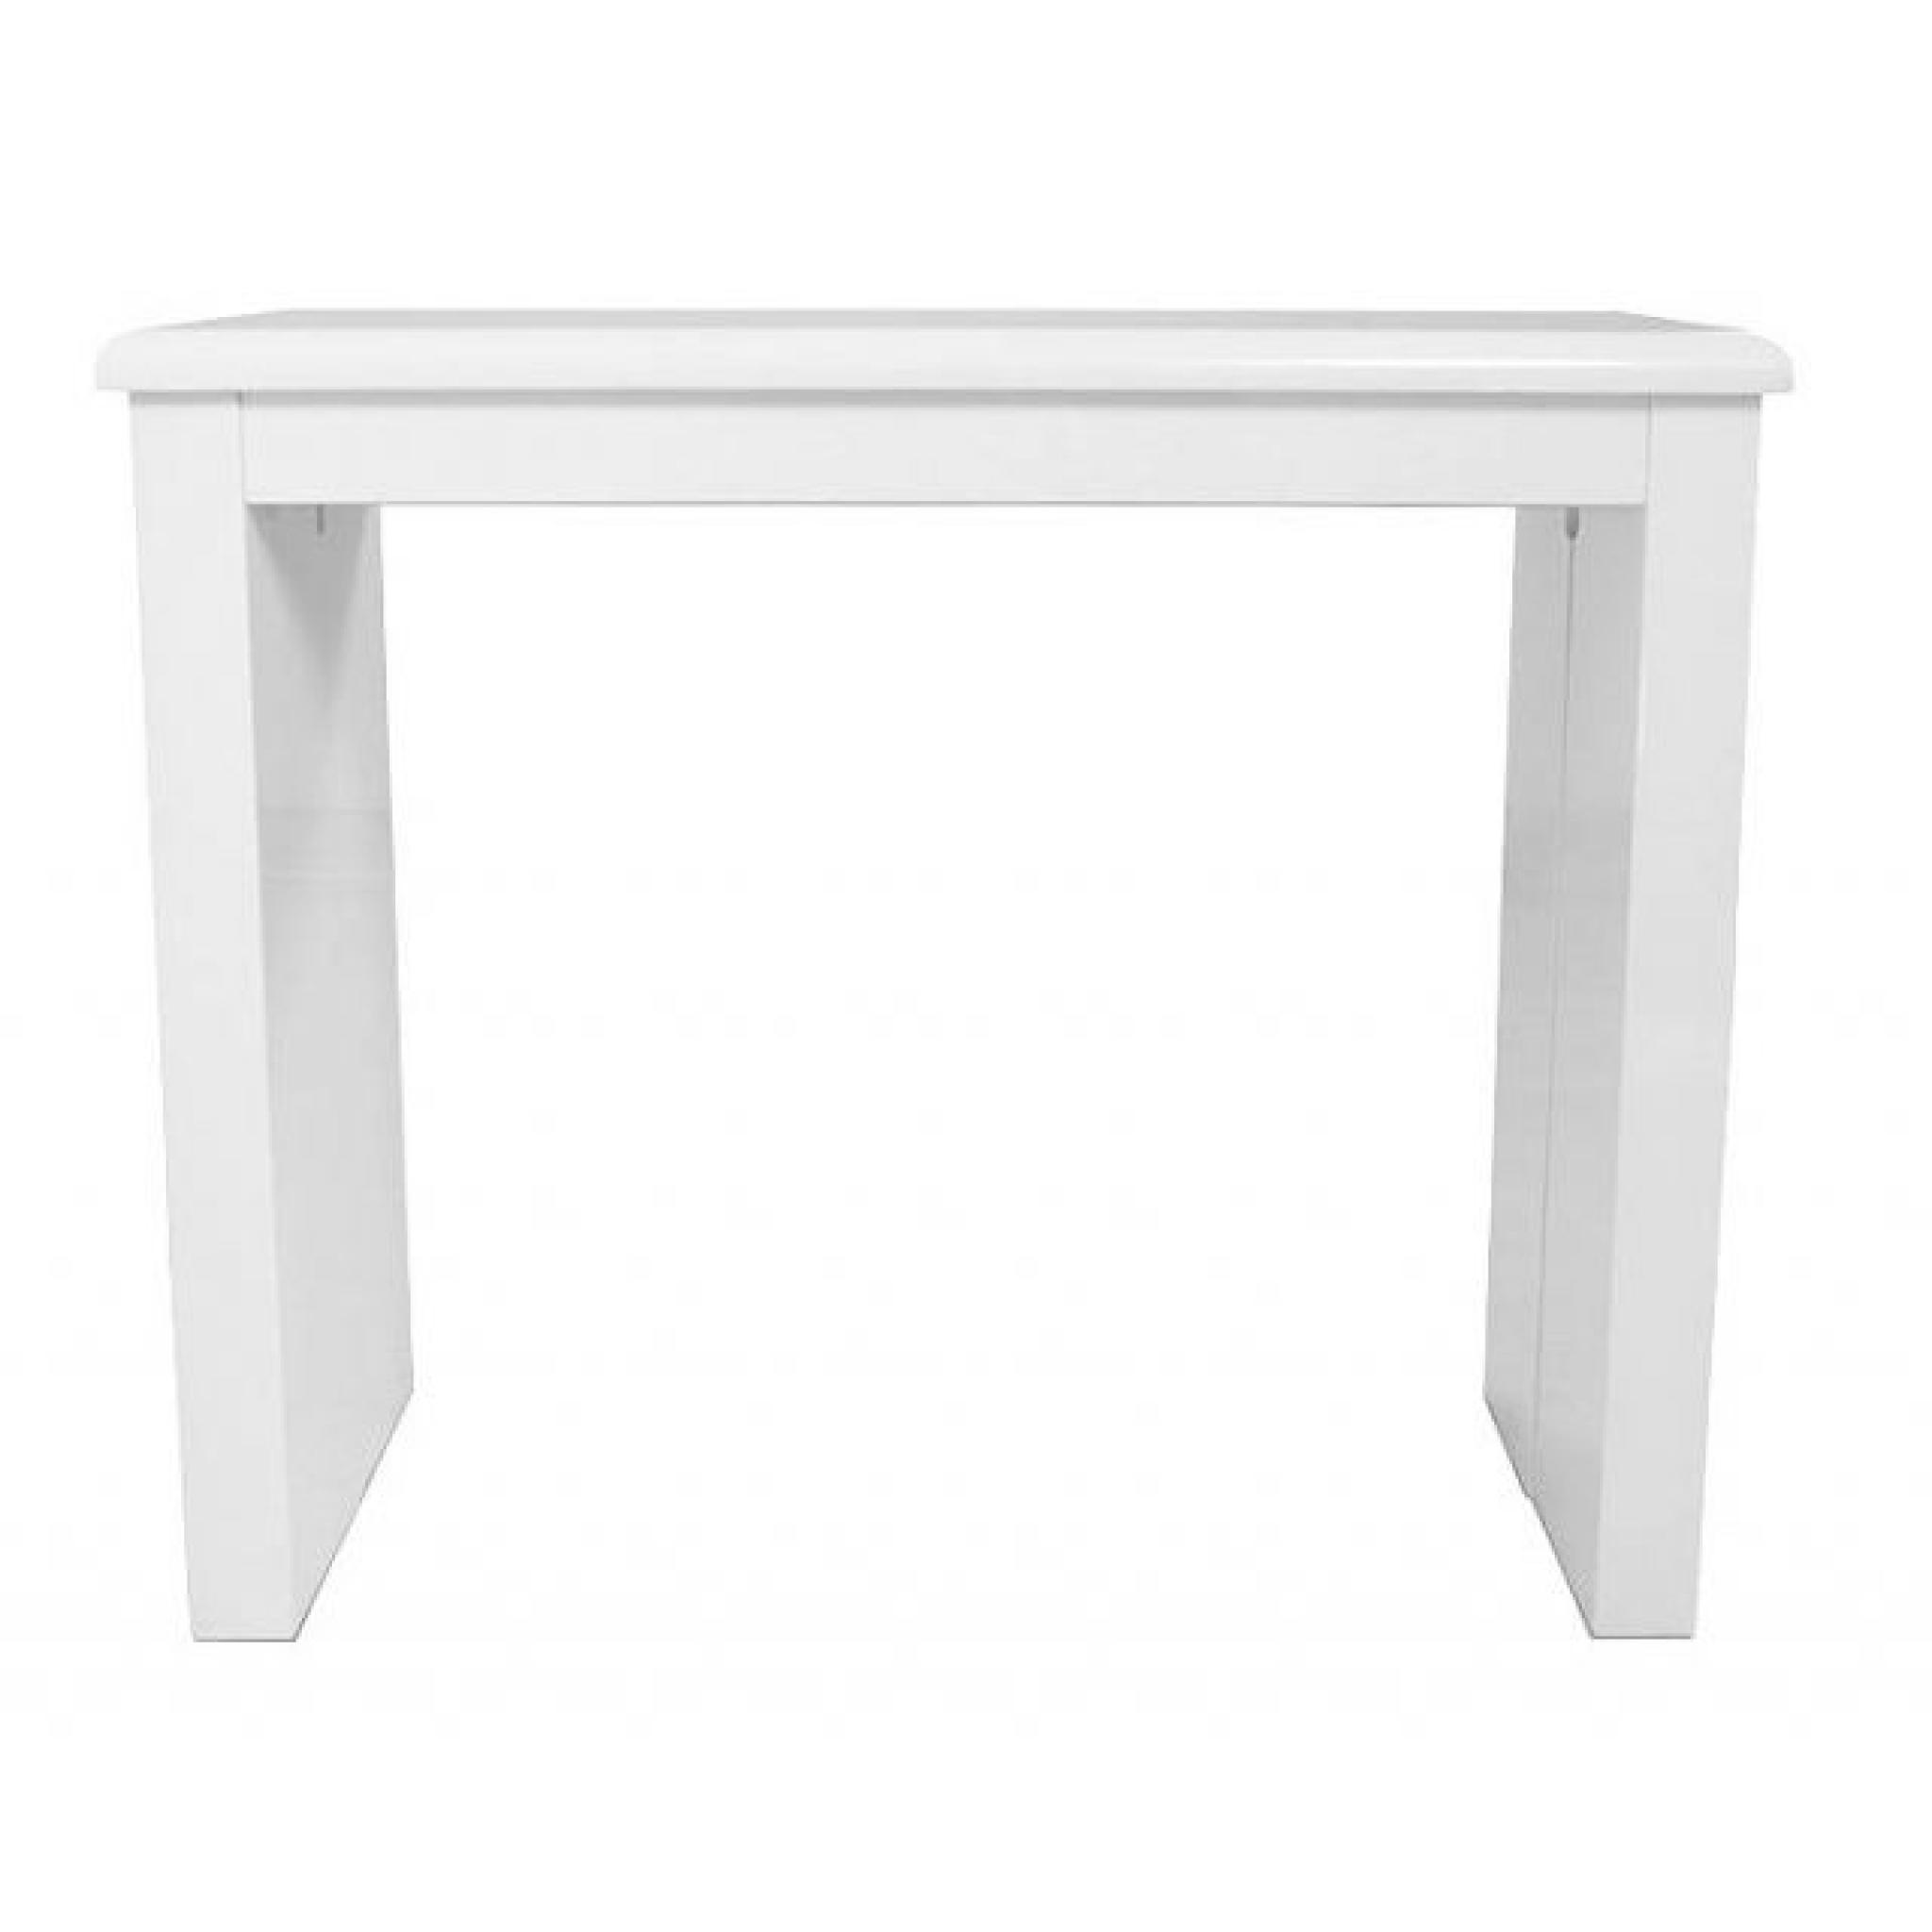 TABLE CONSOLE EXTENSIBLE KELLY BLANC LAQUEE pas cher